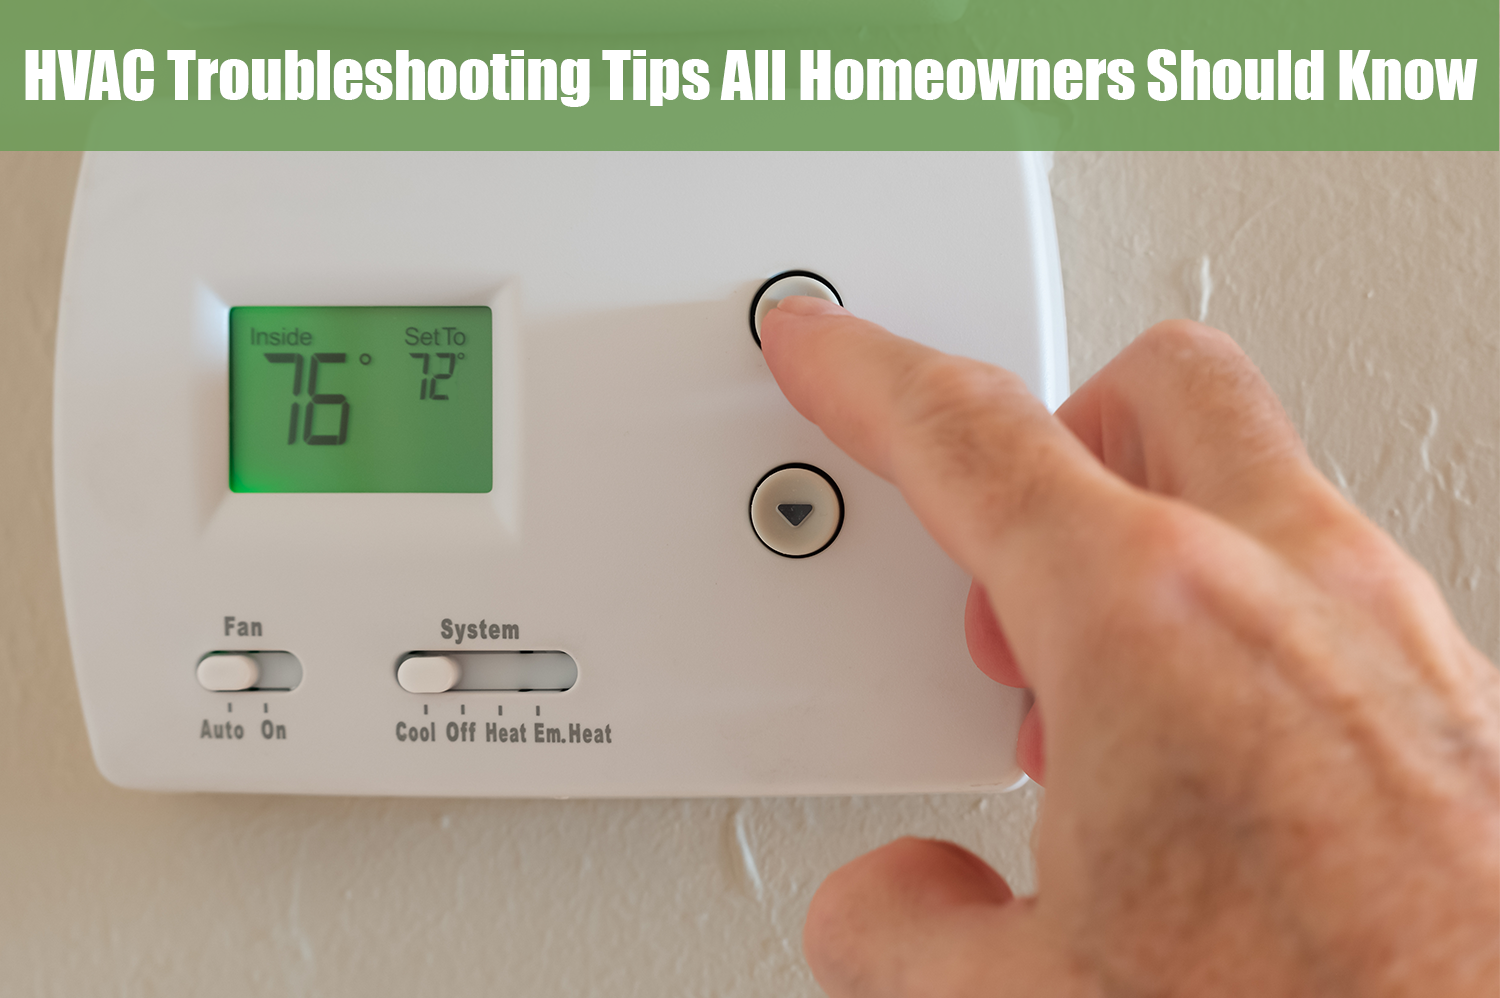 Person adjusting the temperature on their thermostat as an HVAC troubleshooting trick.